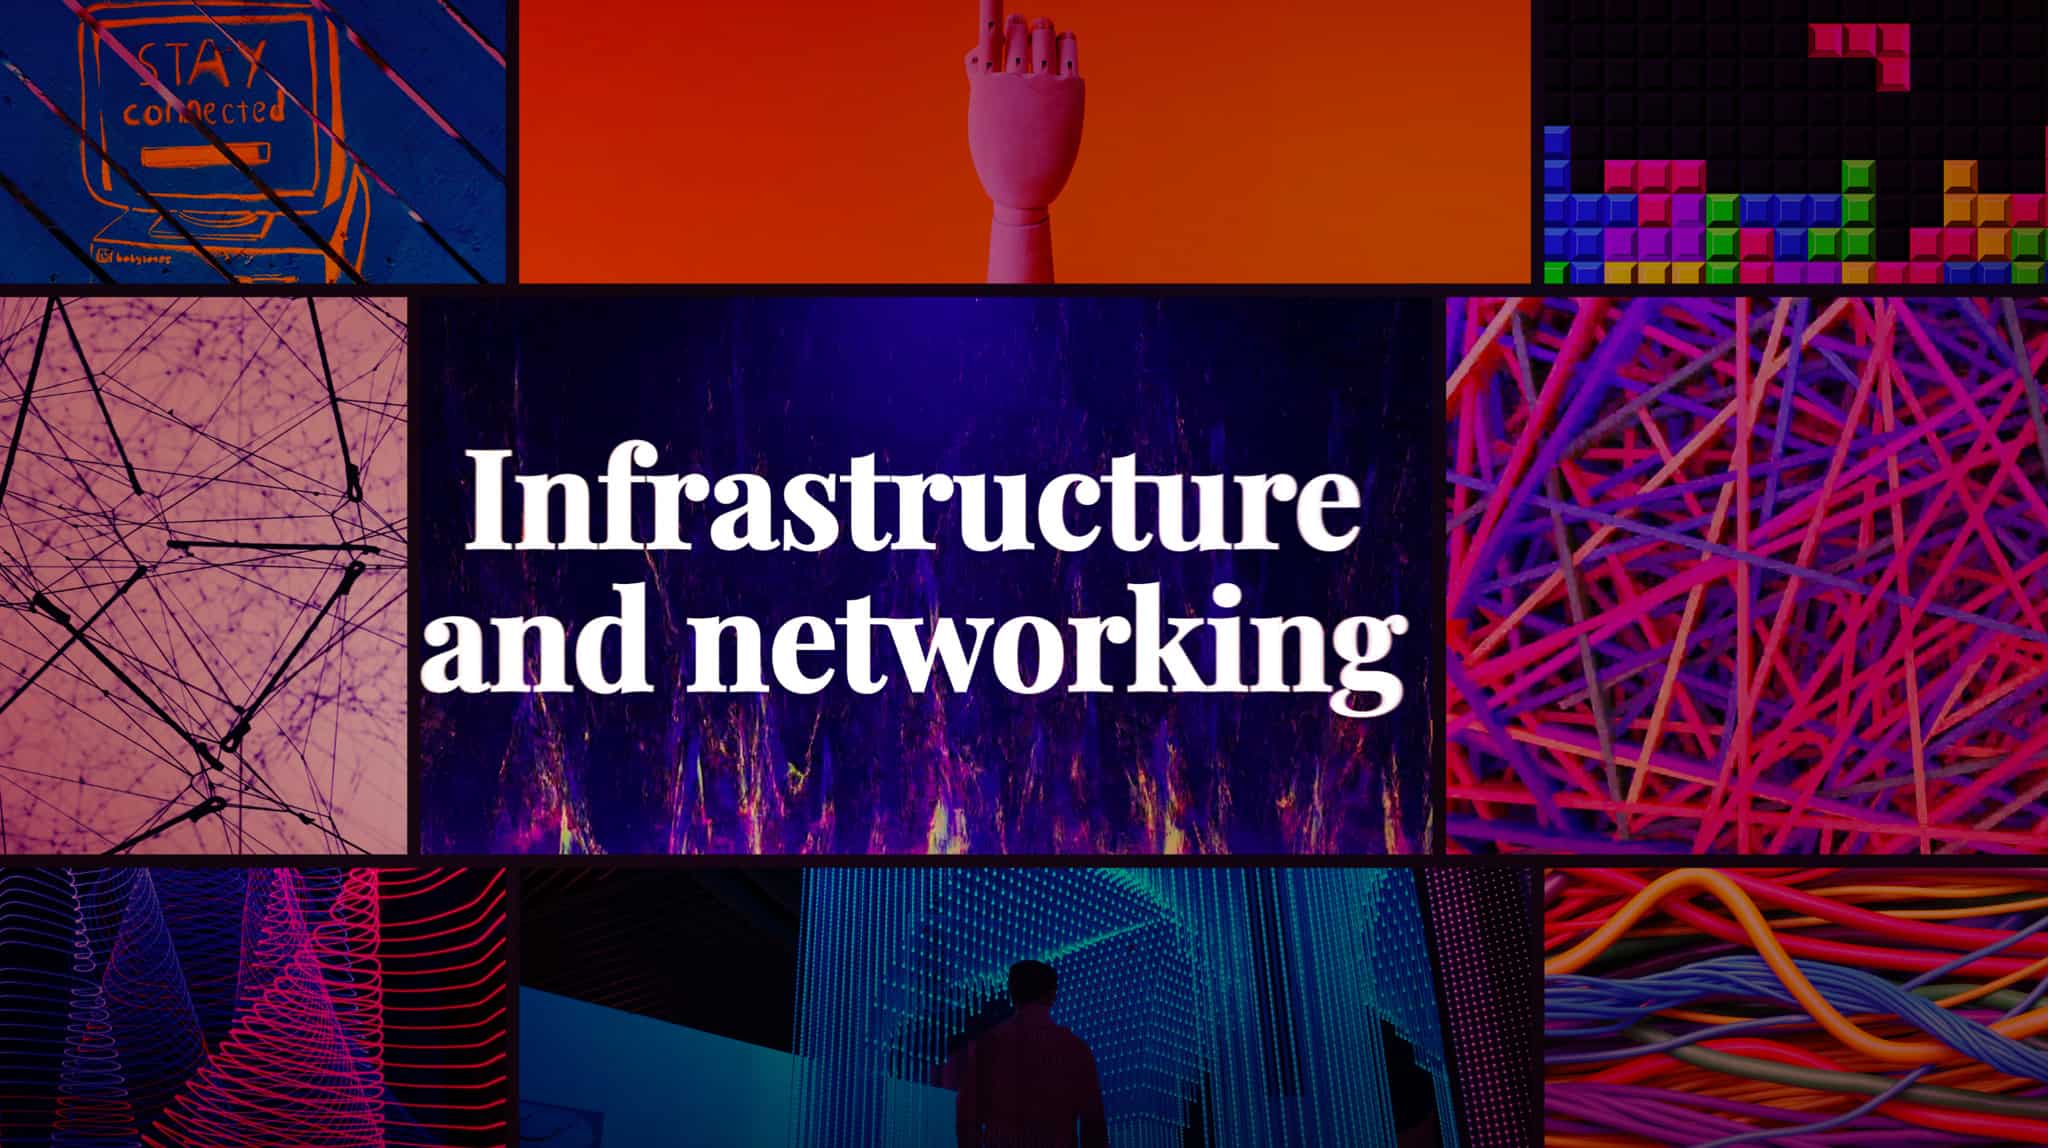 Tech Marketing for Infrastructure and Networking